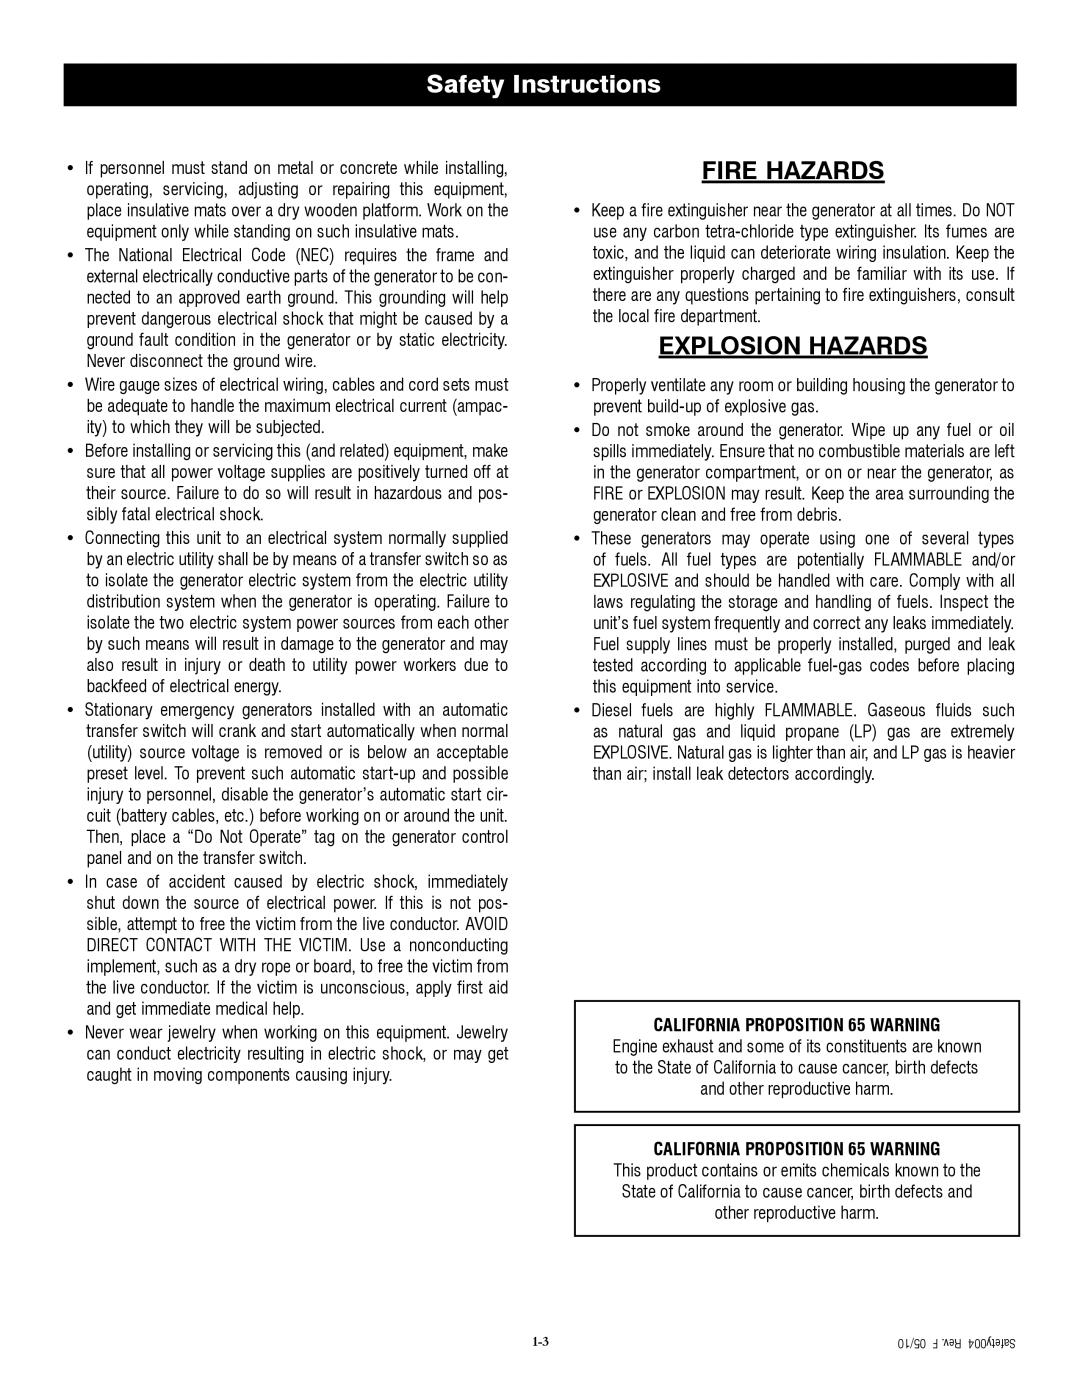 Generac QT04524ANSX owner manual Fire Hazards, Explosion Hazards, Safety Instructions, CALIFORNIA PROPOSITION 65 WARNING 